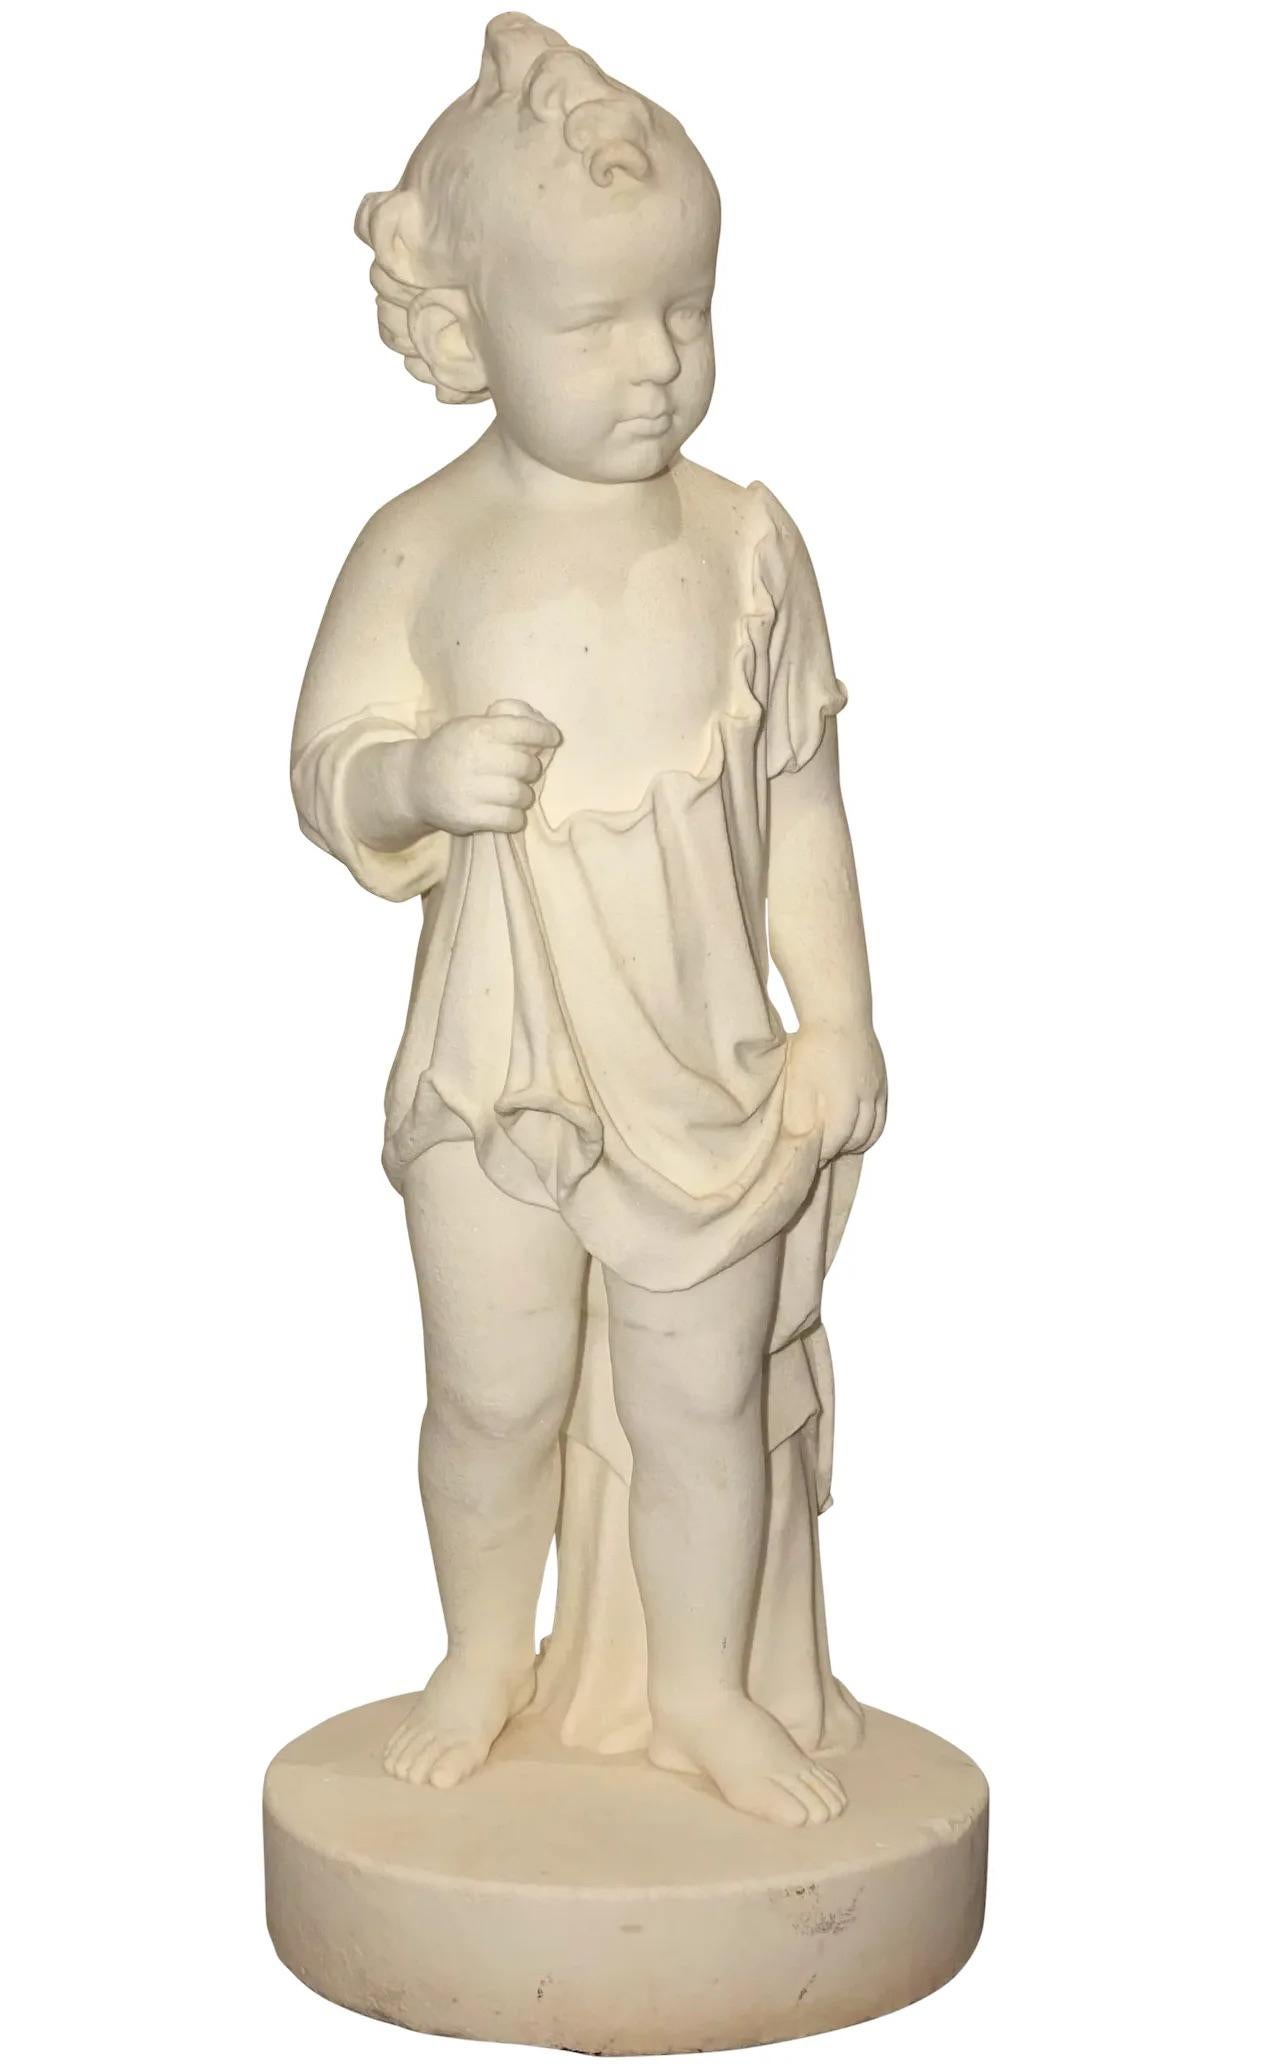 Sculpture of a Young Boy with Robe - Art by Martin Milmore